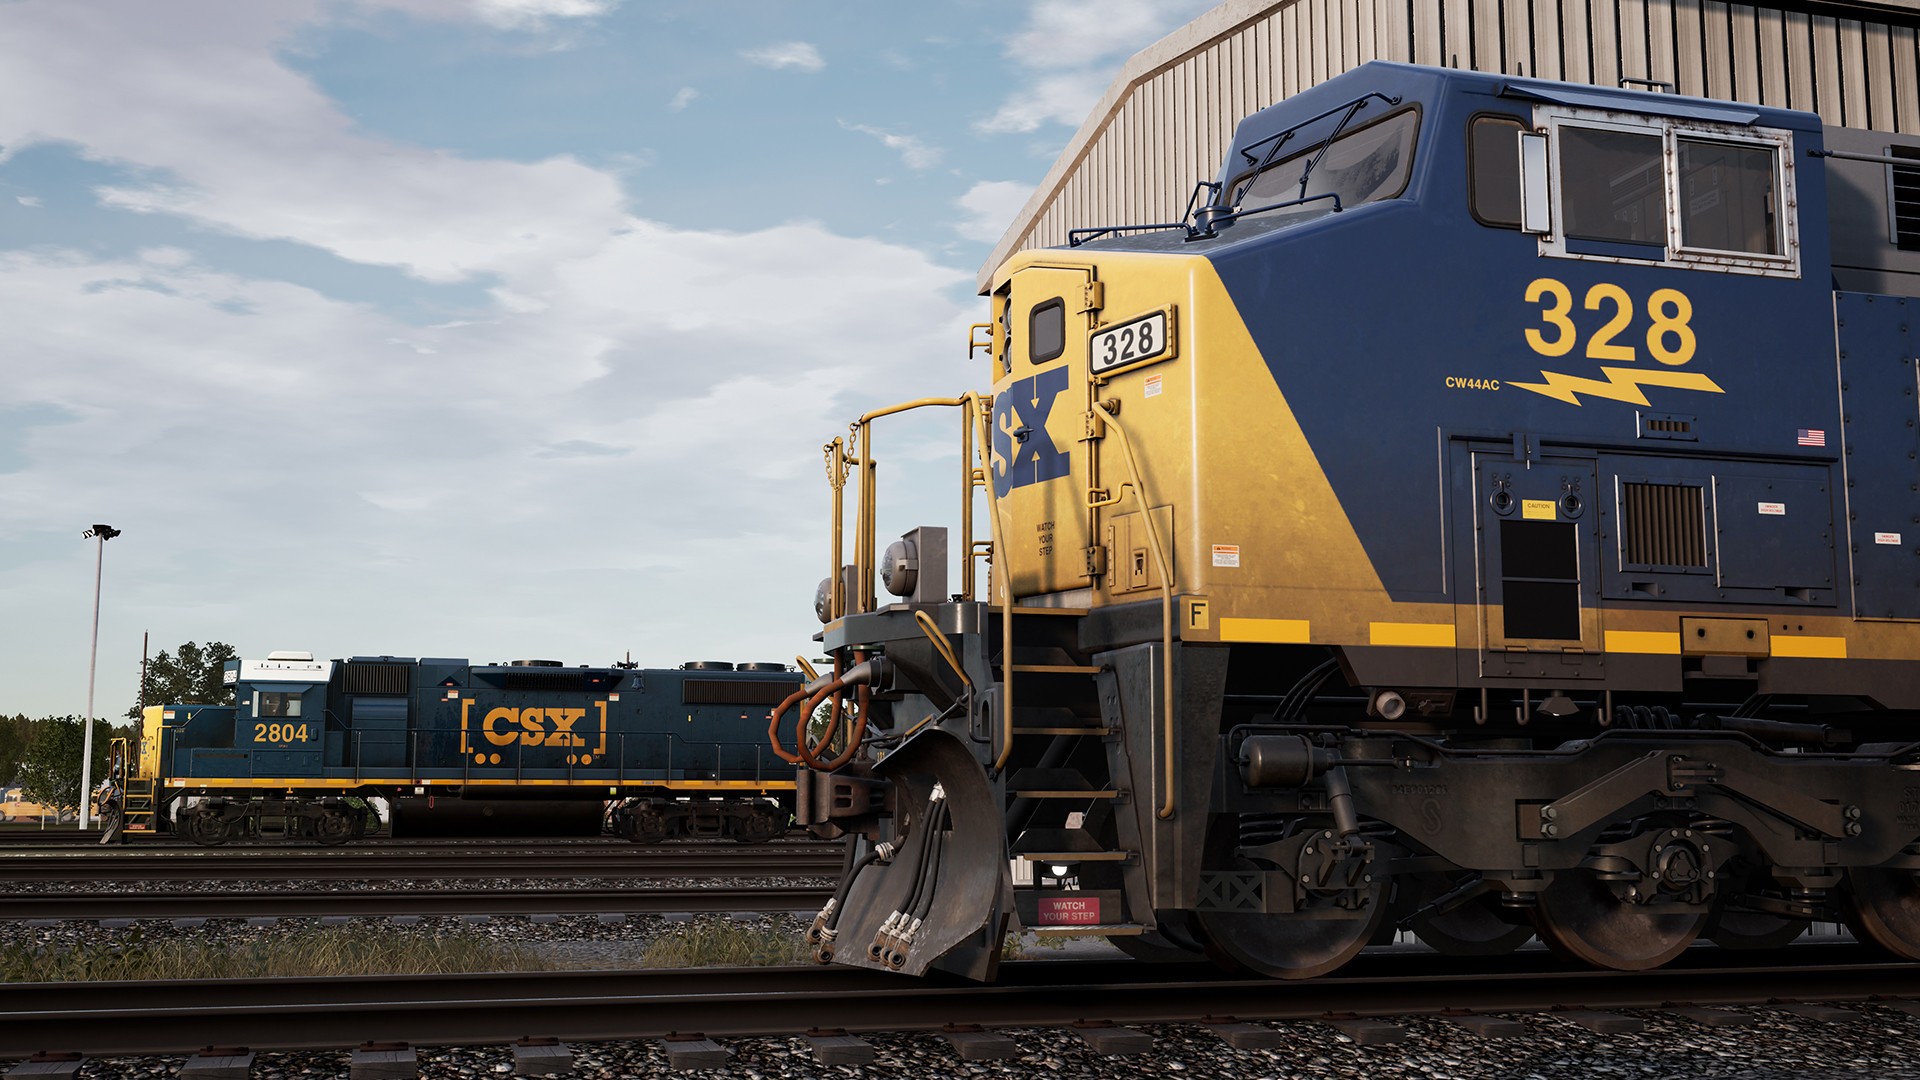 Train Sim World 2 Is Free on Epic Games Store, Sans the $1,000